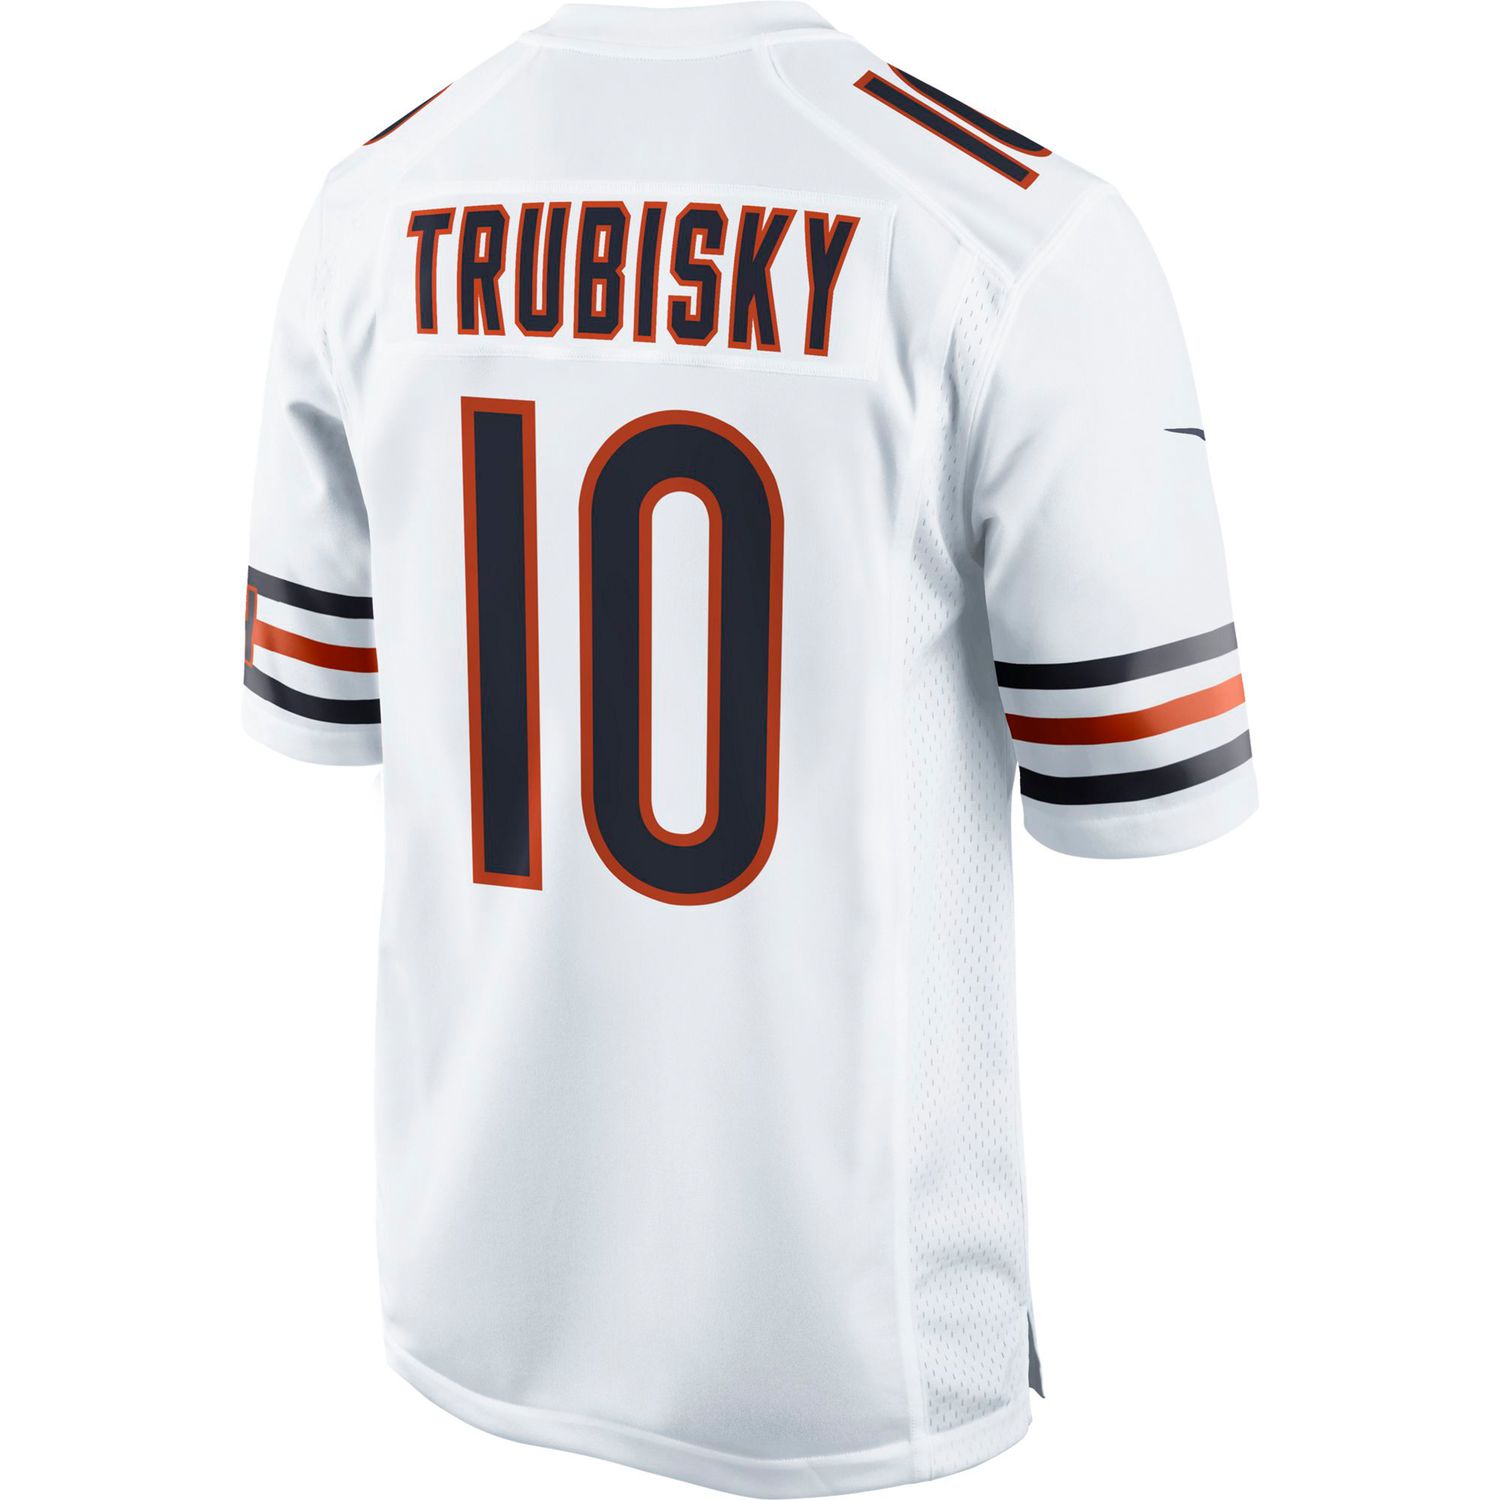 mitchell trubisky signed jersey